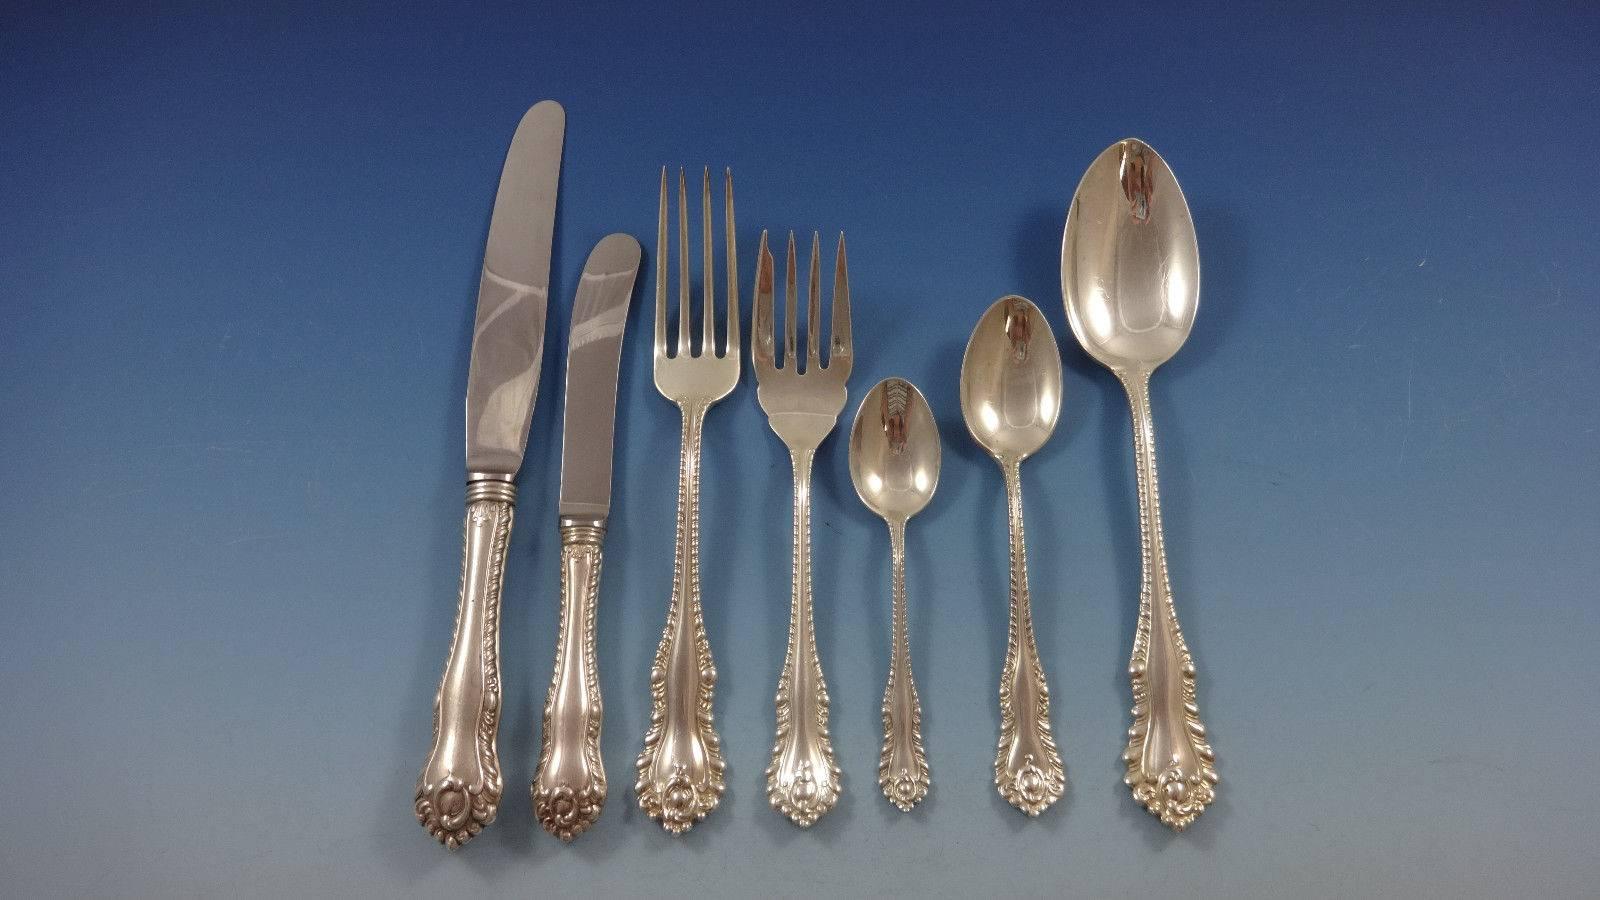 Beautiful Gadroon by Birks (Canadian) sterling silver flatware set of 62 pieces. This set includes:

Eight knives, 8 1/2